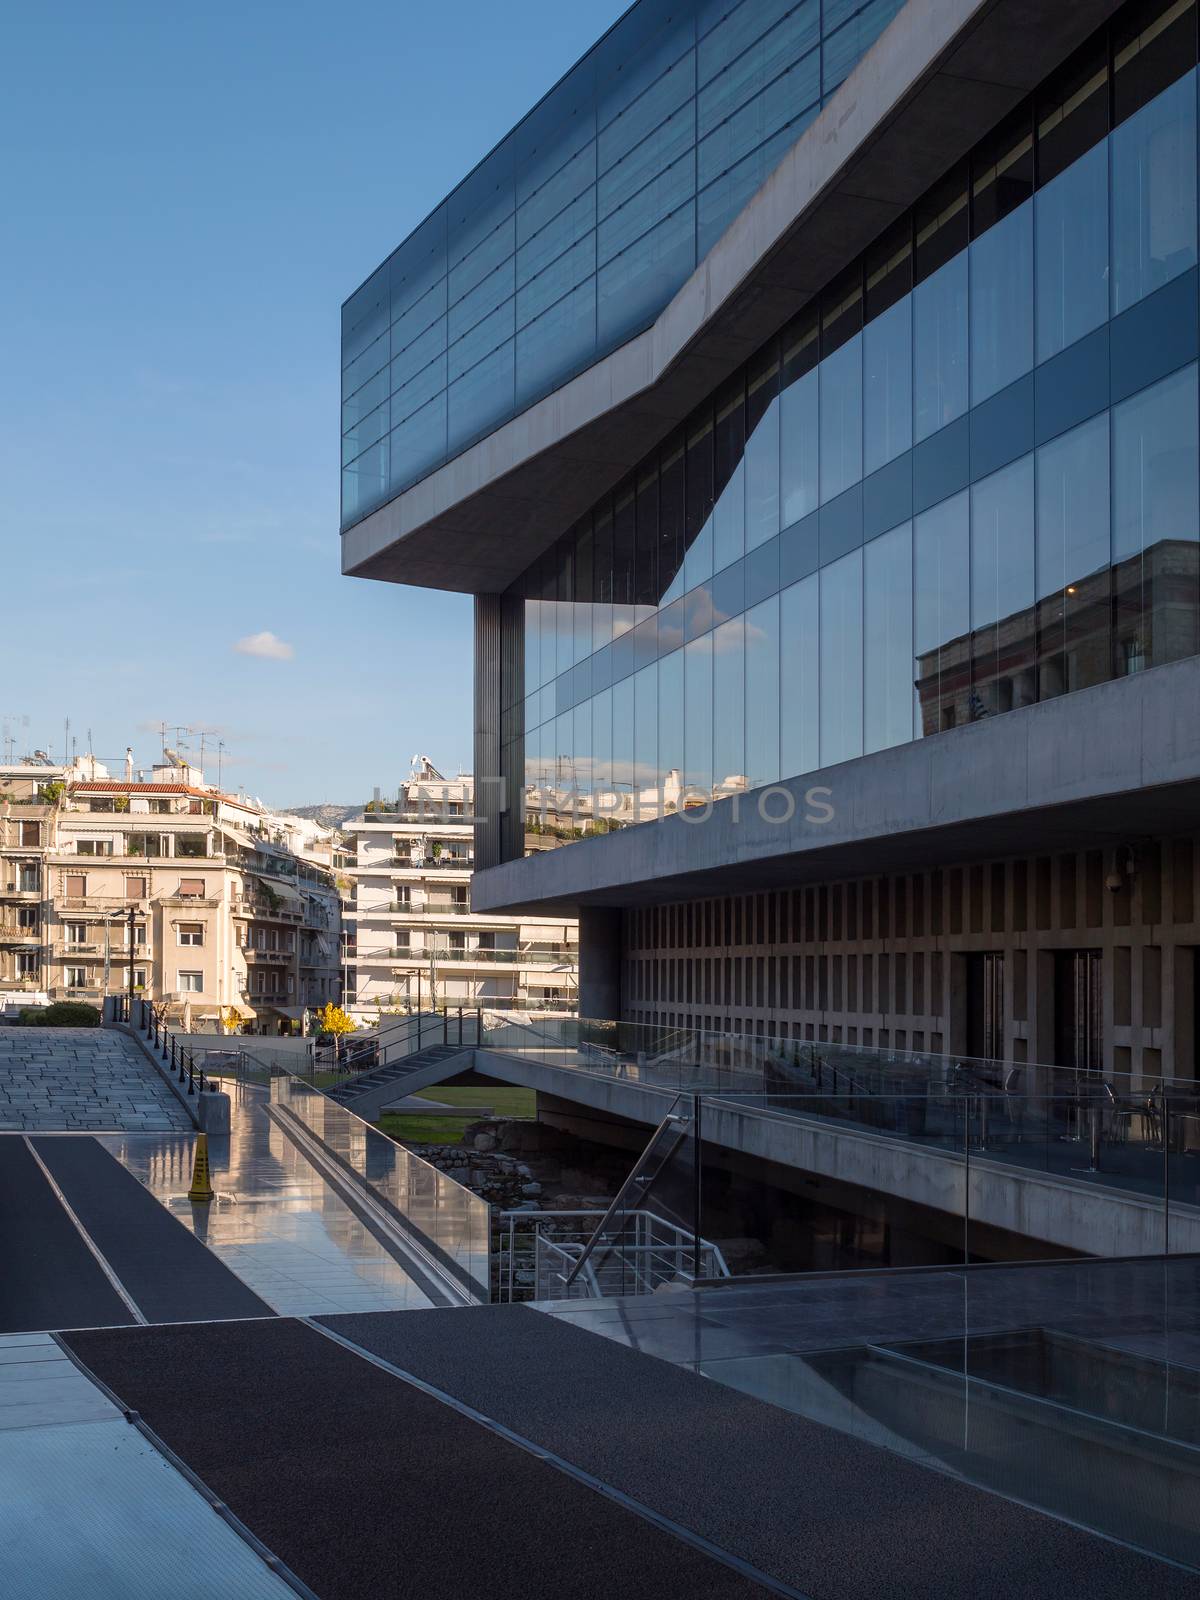 The Acropolis museum in Athens by smoxx